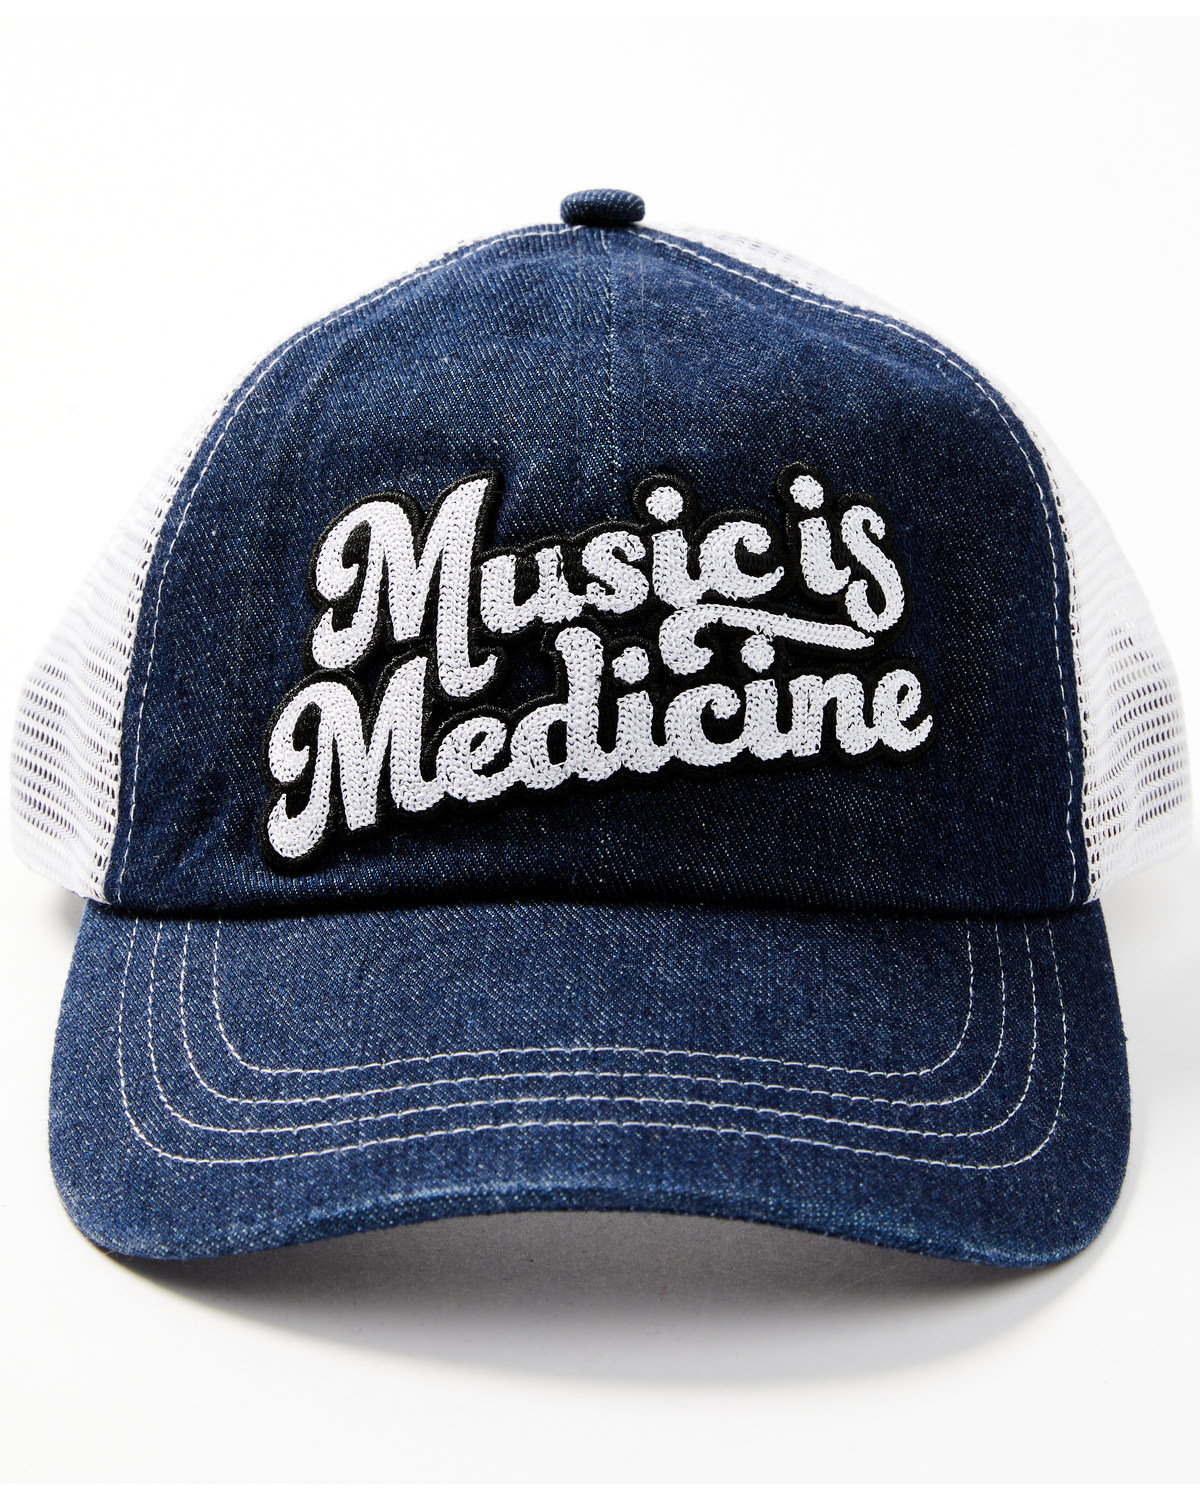 Idyllwind Women's Music Is Medicine Embroidered Mesh Back Ball Cap